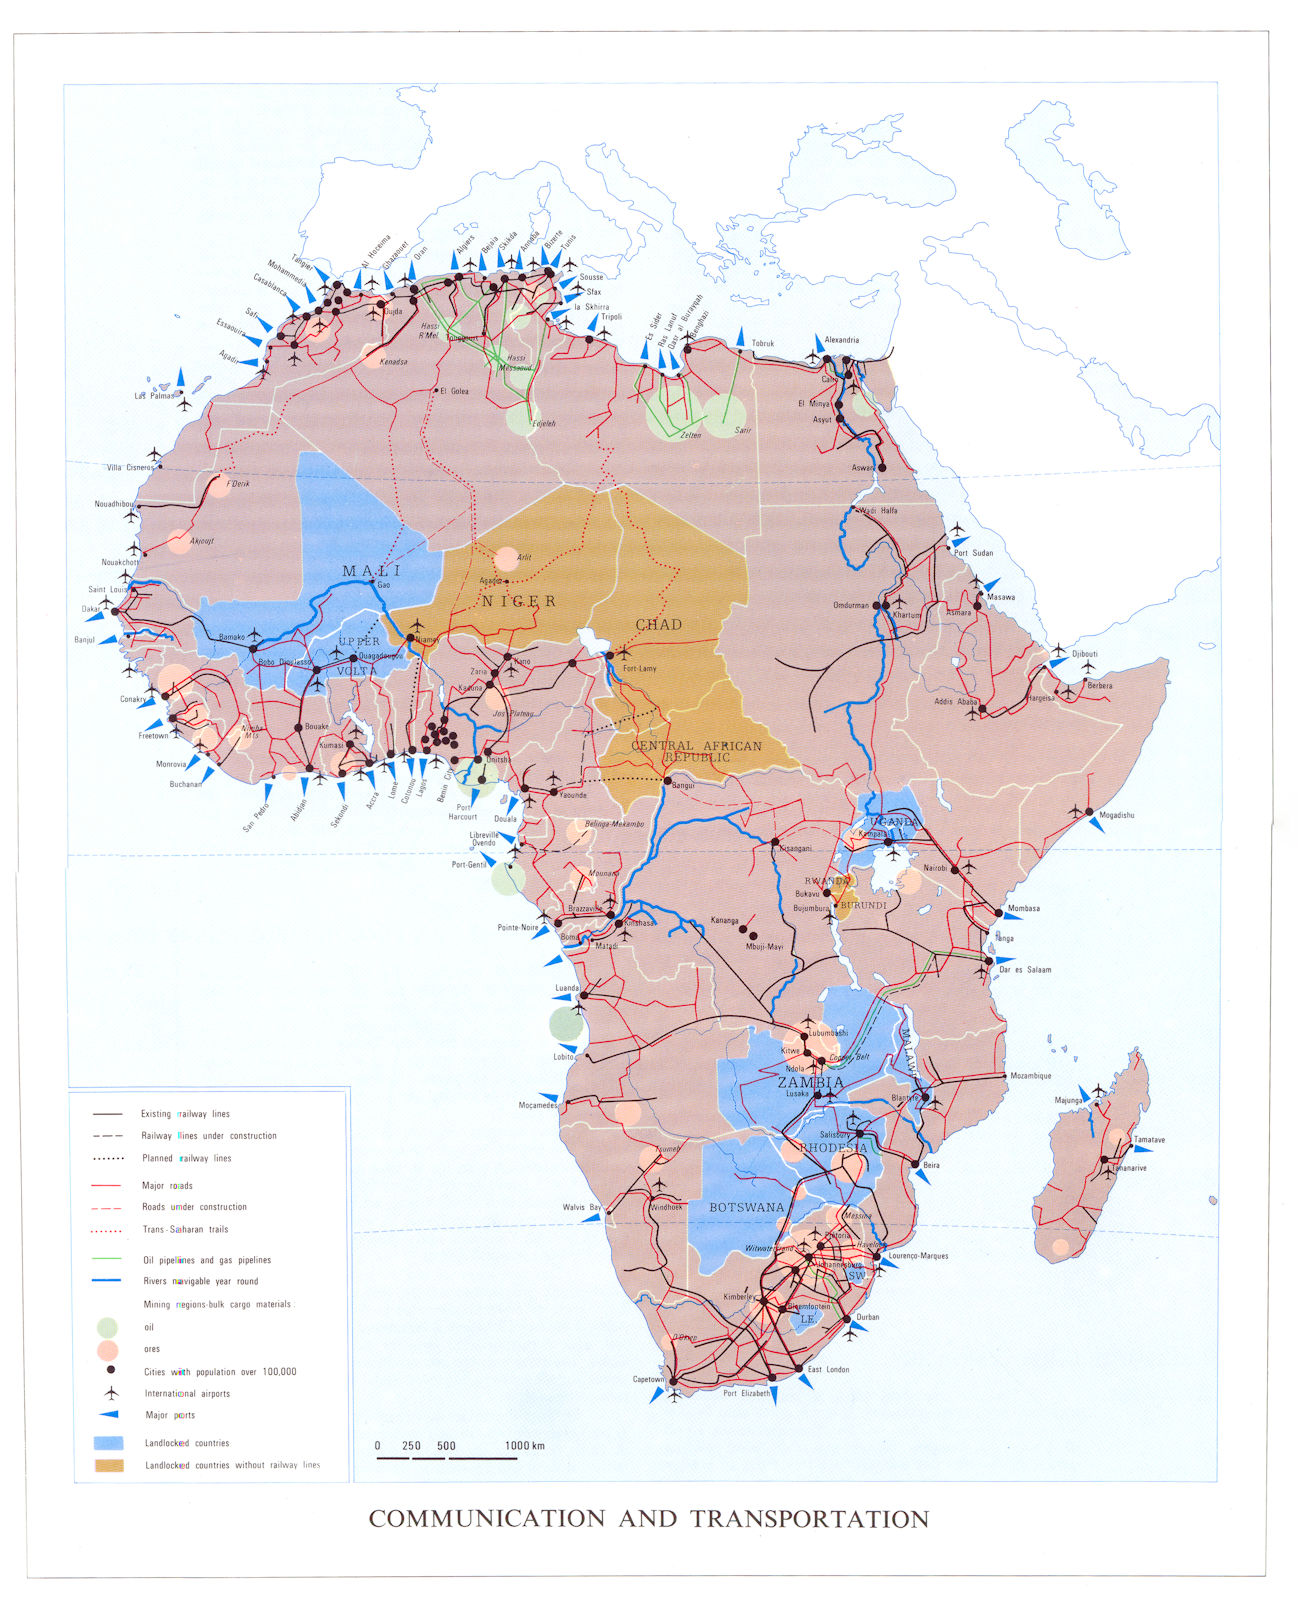 AFRICA. Communication and transportation. Rail roads pipelines ports 1973 map